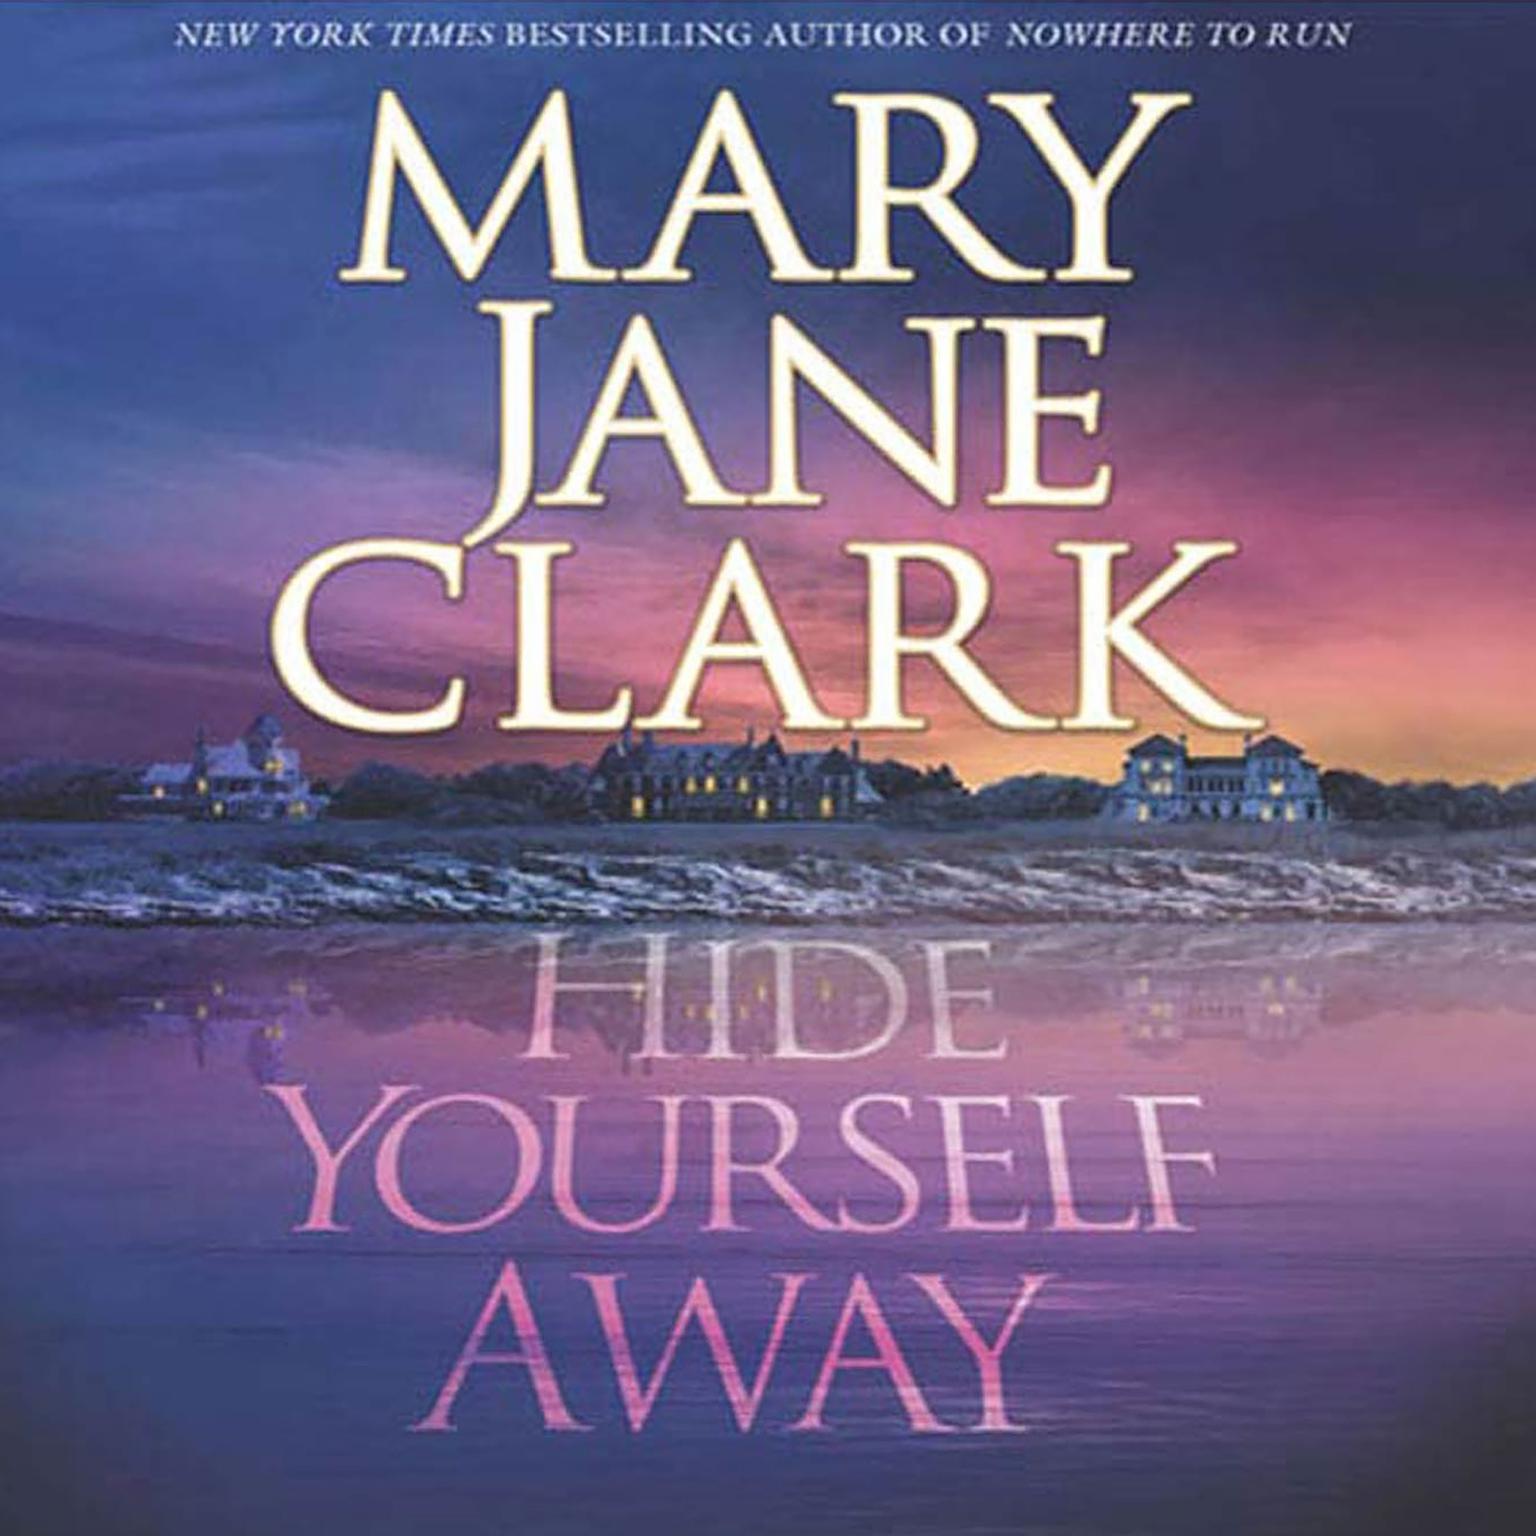 Hide Yourself Away (Abridged) Audiobook, by Mary Jane Clark